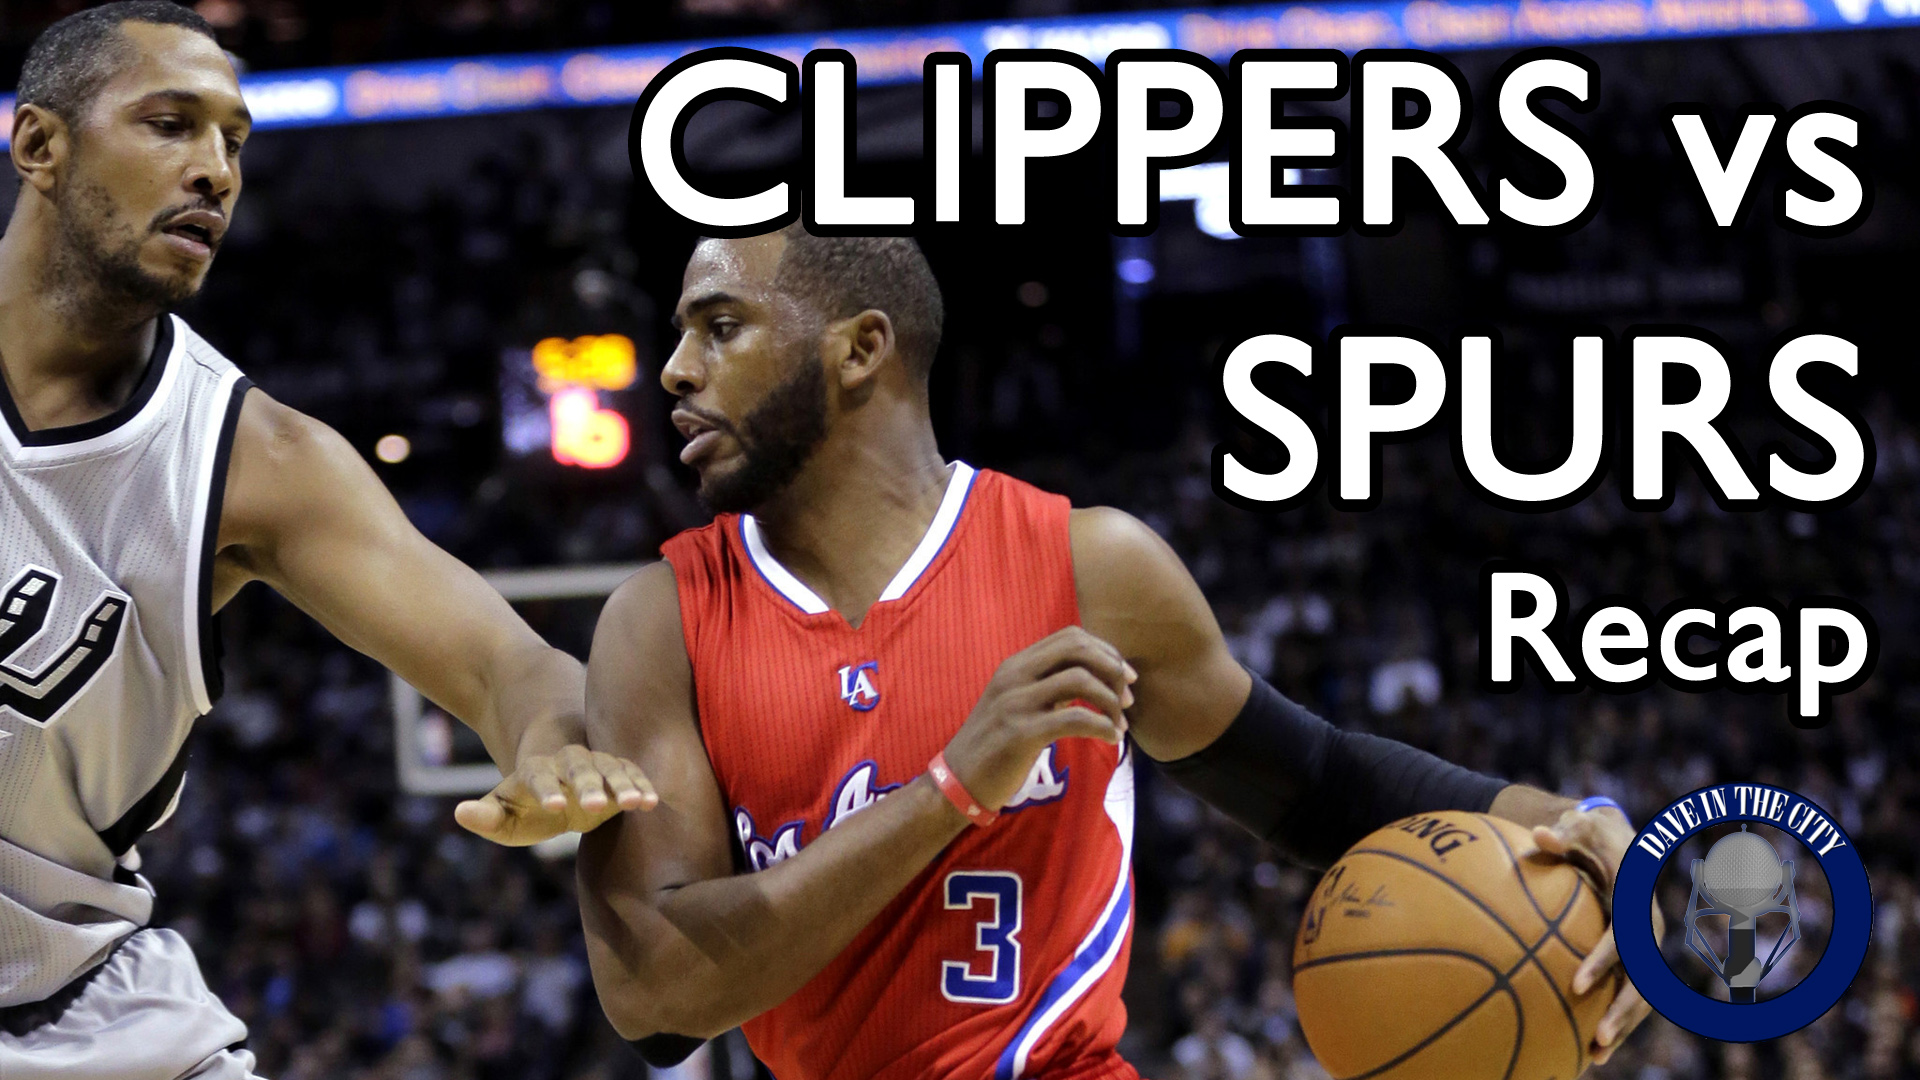 Podcast: Clippers vs Spurs, NBA Playoffs 1st Round, Kentucky Derby, RQ's (04-29-15)